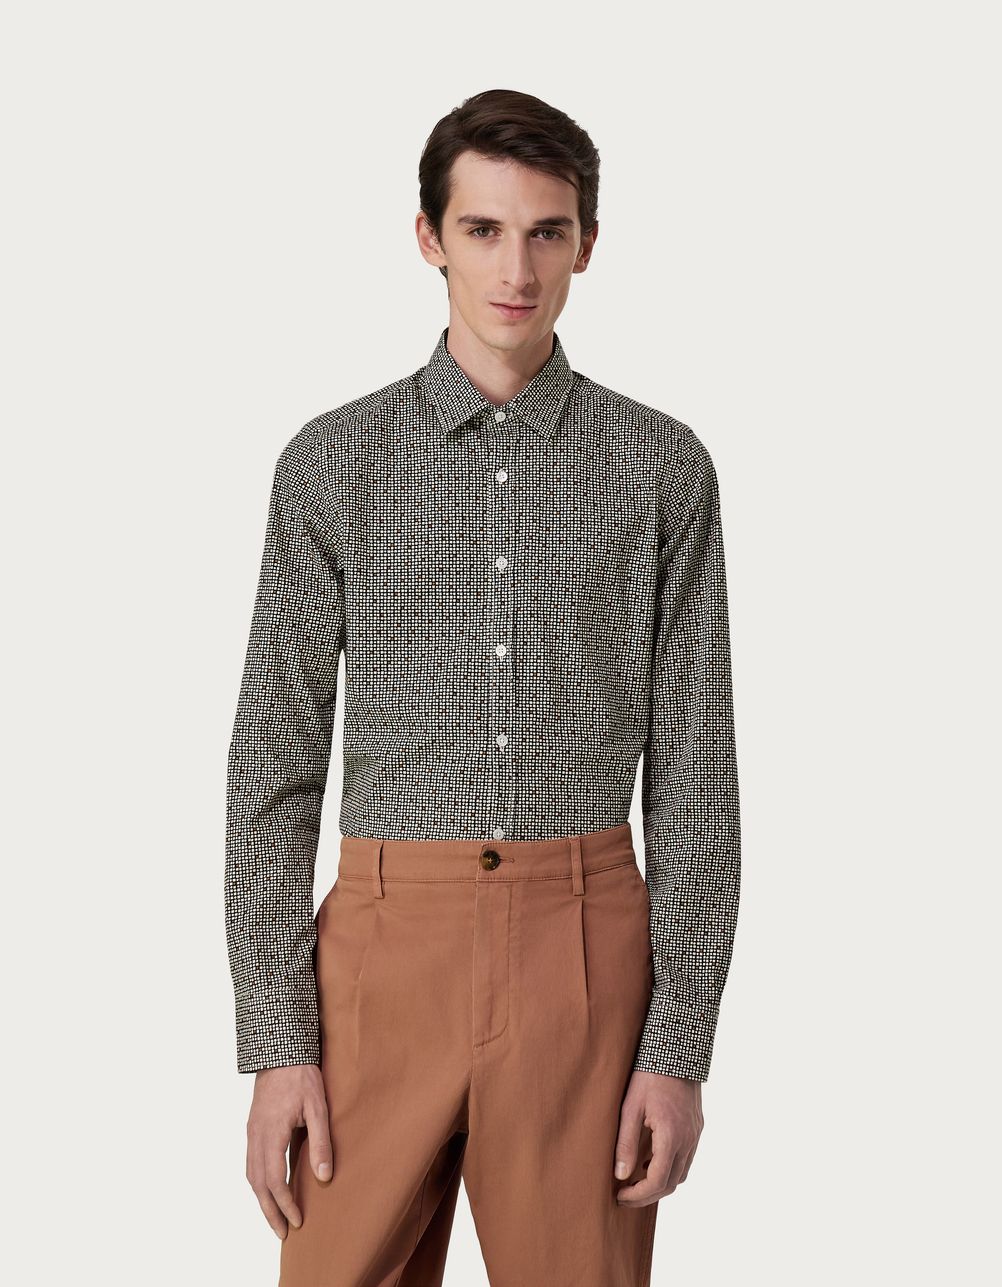 Slim-fit shirt in beige and black cotton